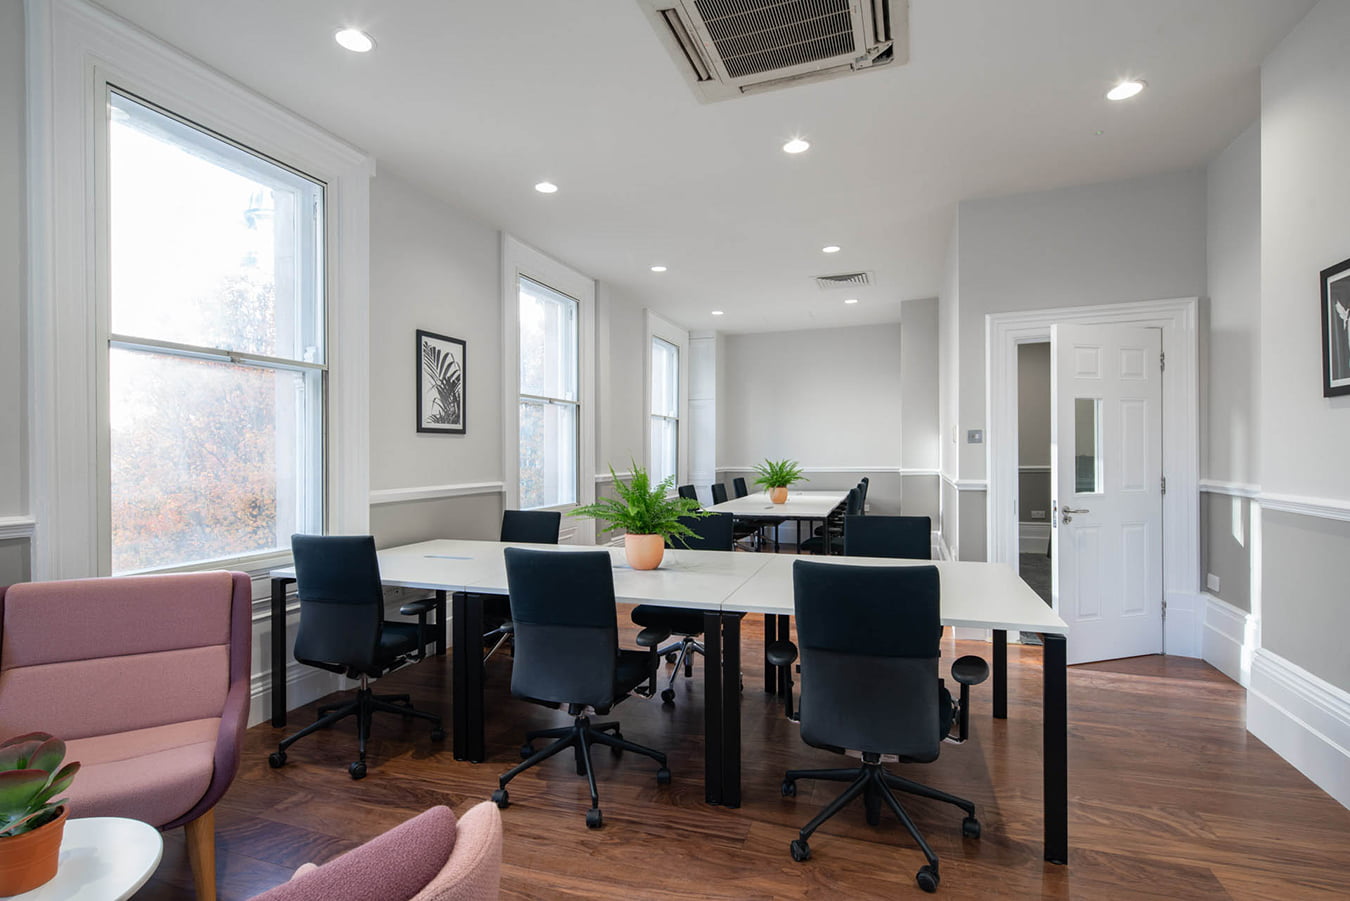 Mayfair’s Office Space: Where Success Takes Root